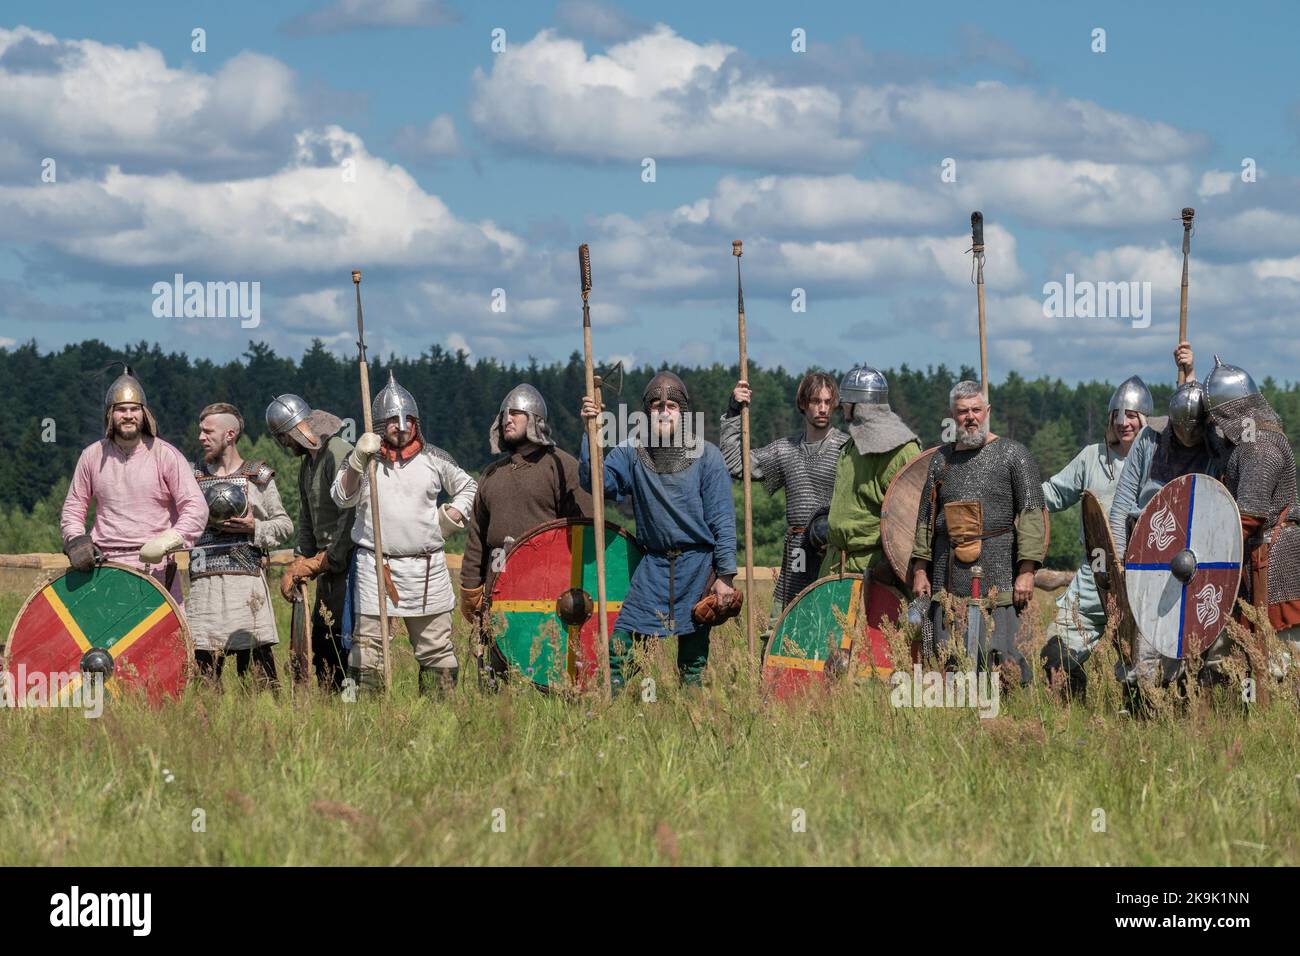 TVER REGION, RUSSIA - JULY 22, 2022: Participants of the historical festival 'Epic Coast-2022' before the reenactment of the medieval battle Stock Photo